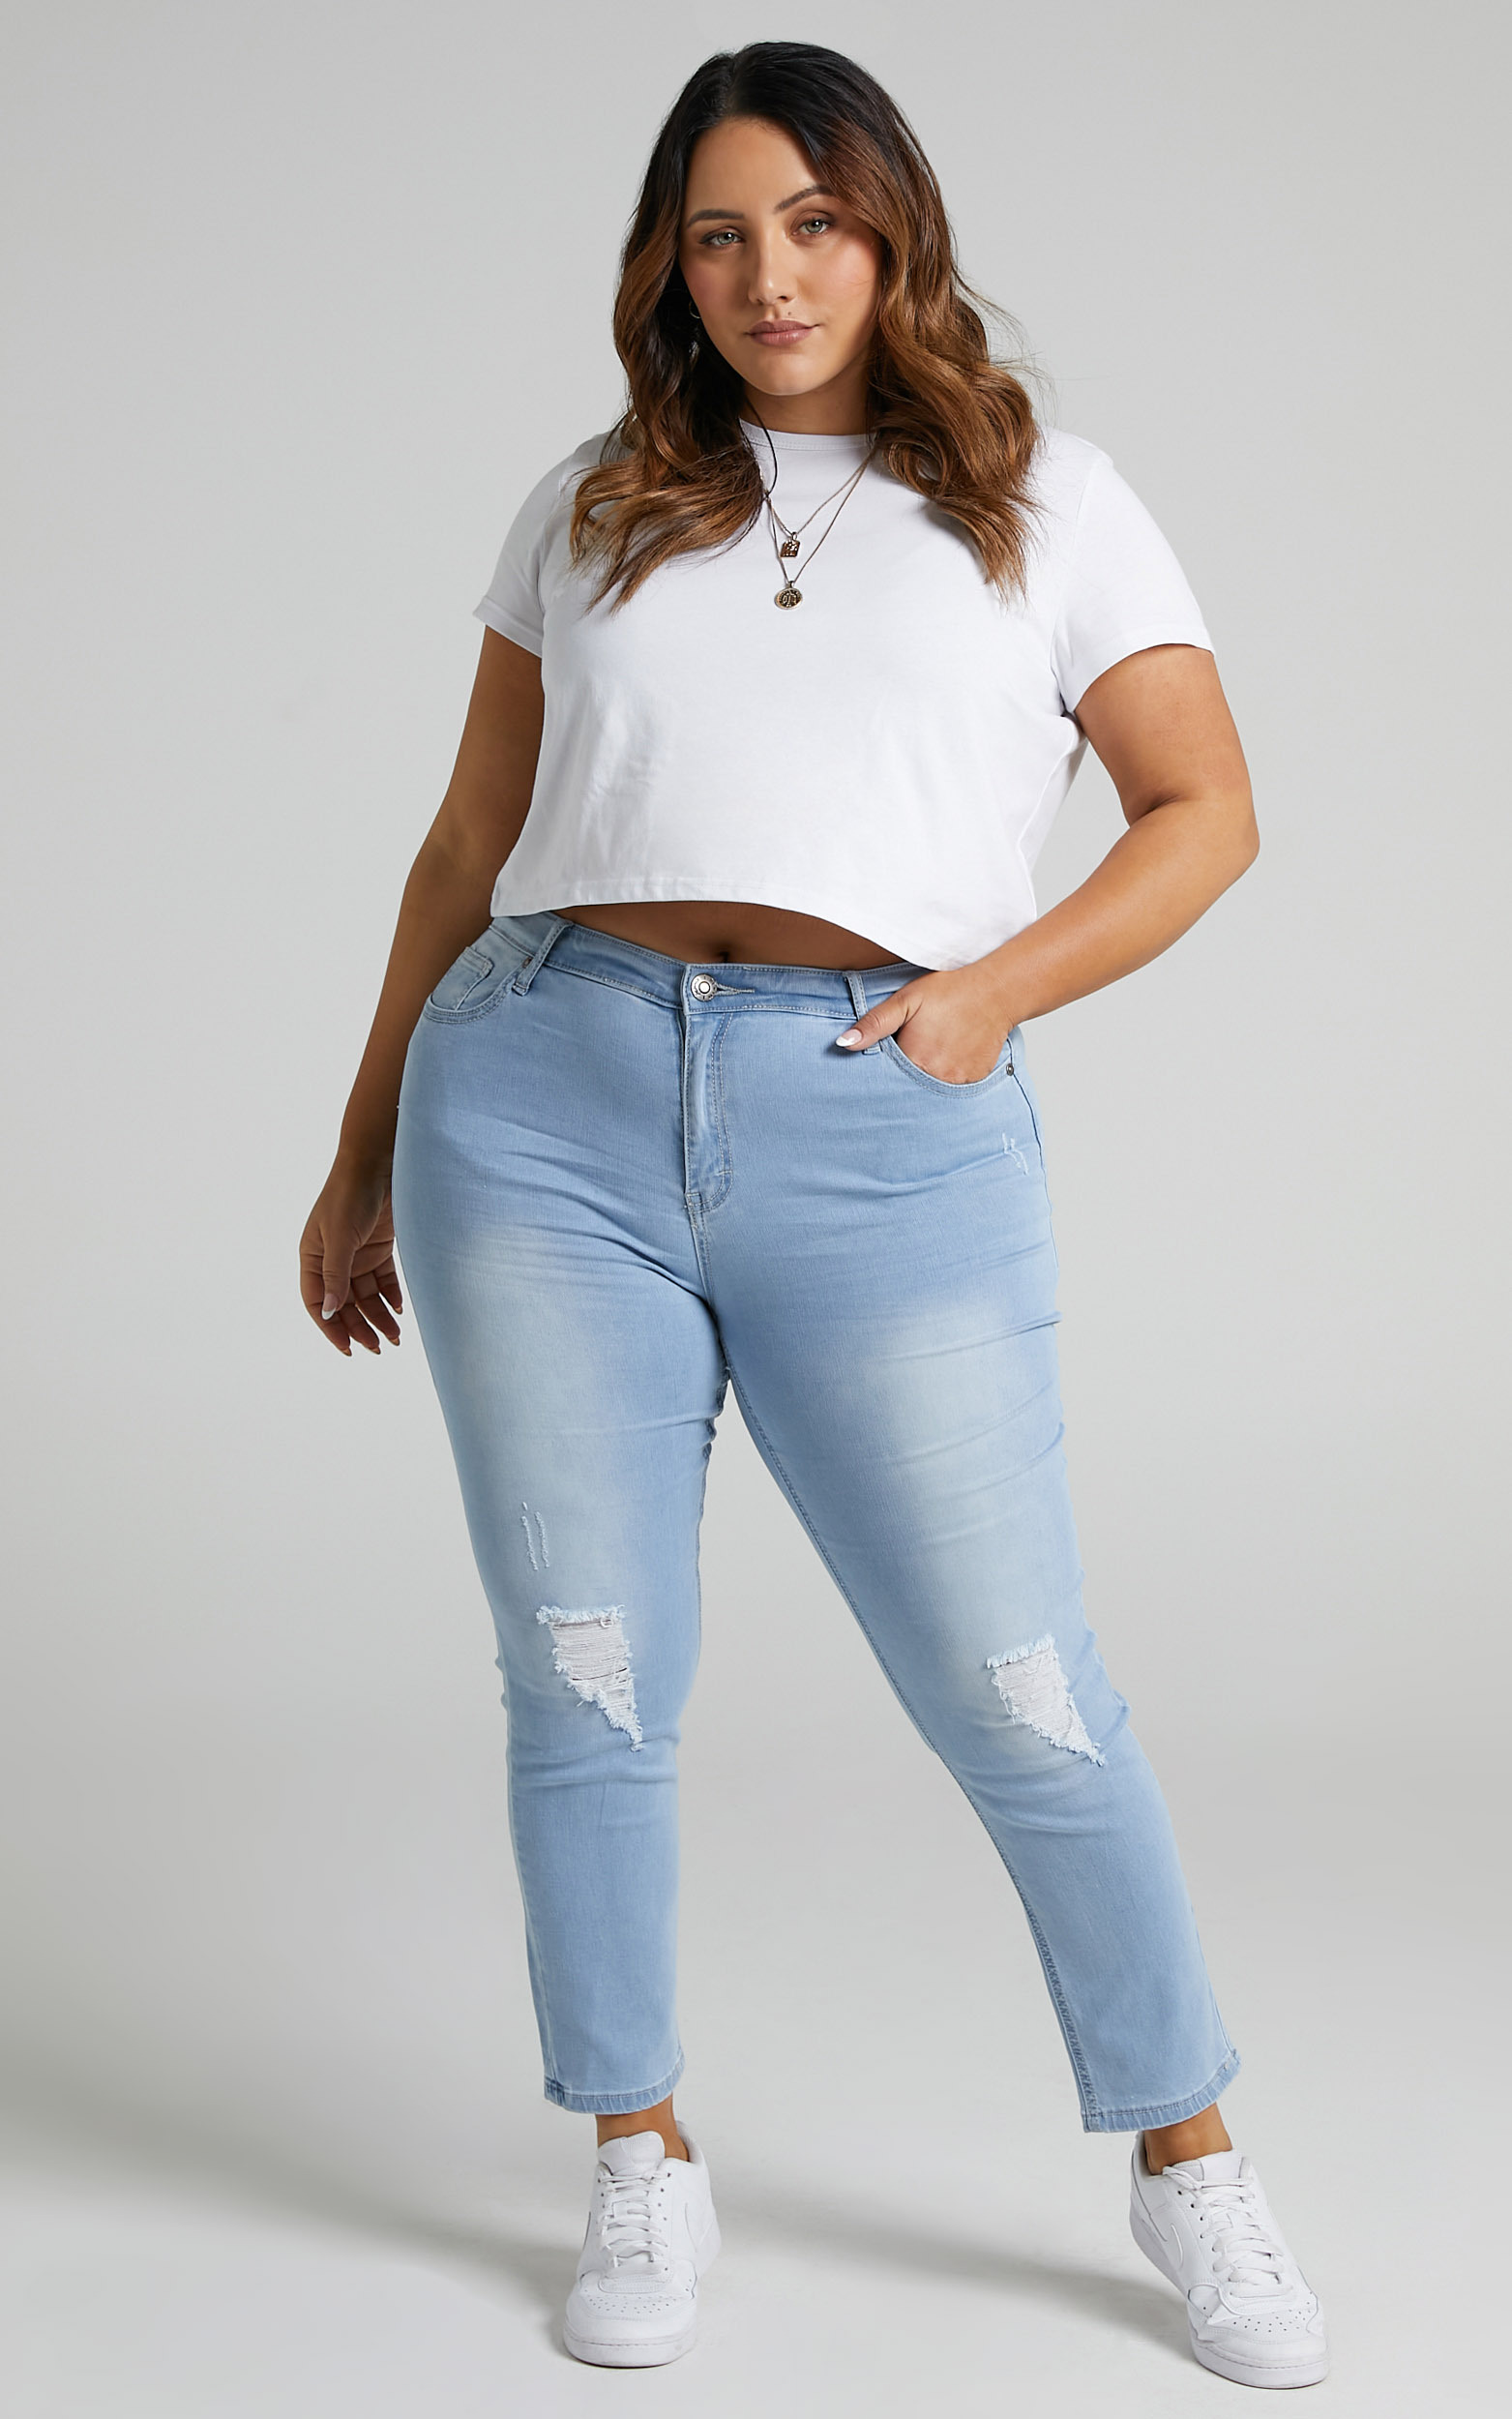 Danzel Boxy Fit Cap Sleeve Crop Top in White - 20, WHT3, hi-res image number null